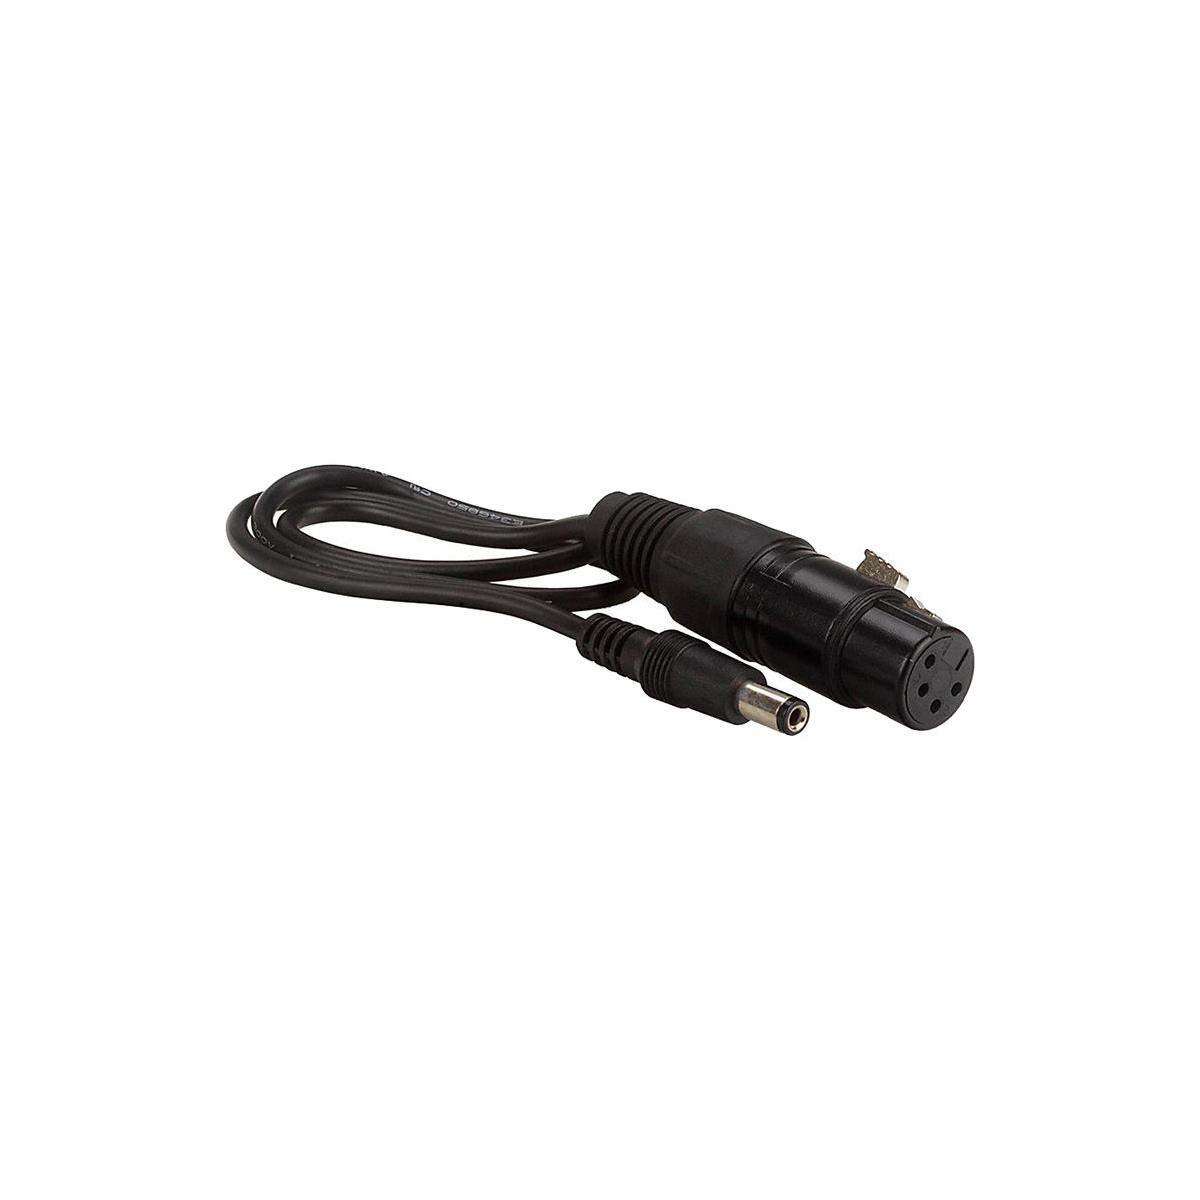 

Fotodiox Power Adapter Cable, 4-Pin XLR Female to 2.1mm Barrel DC, 17"